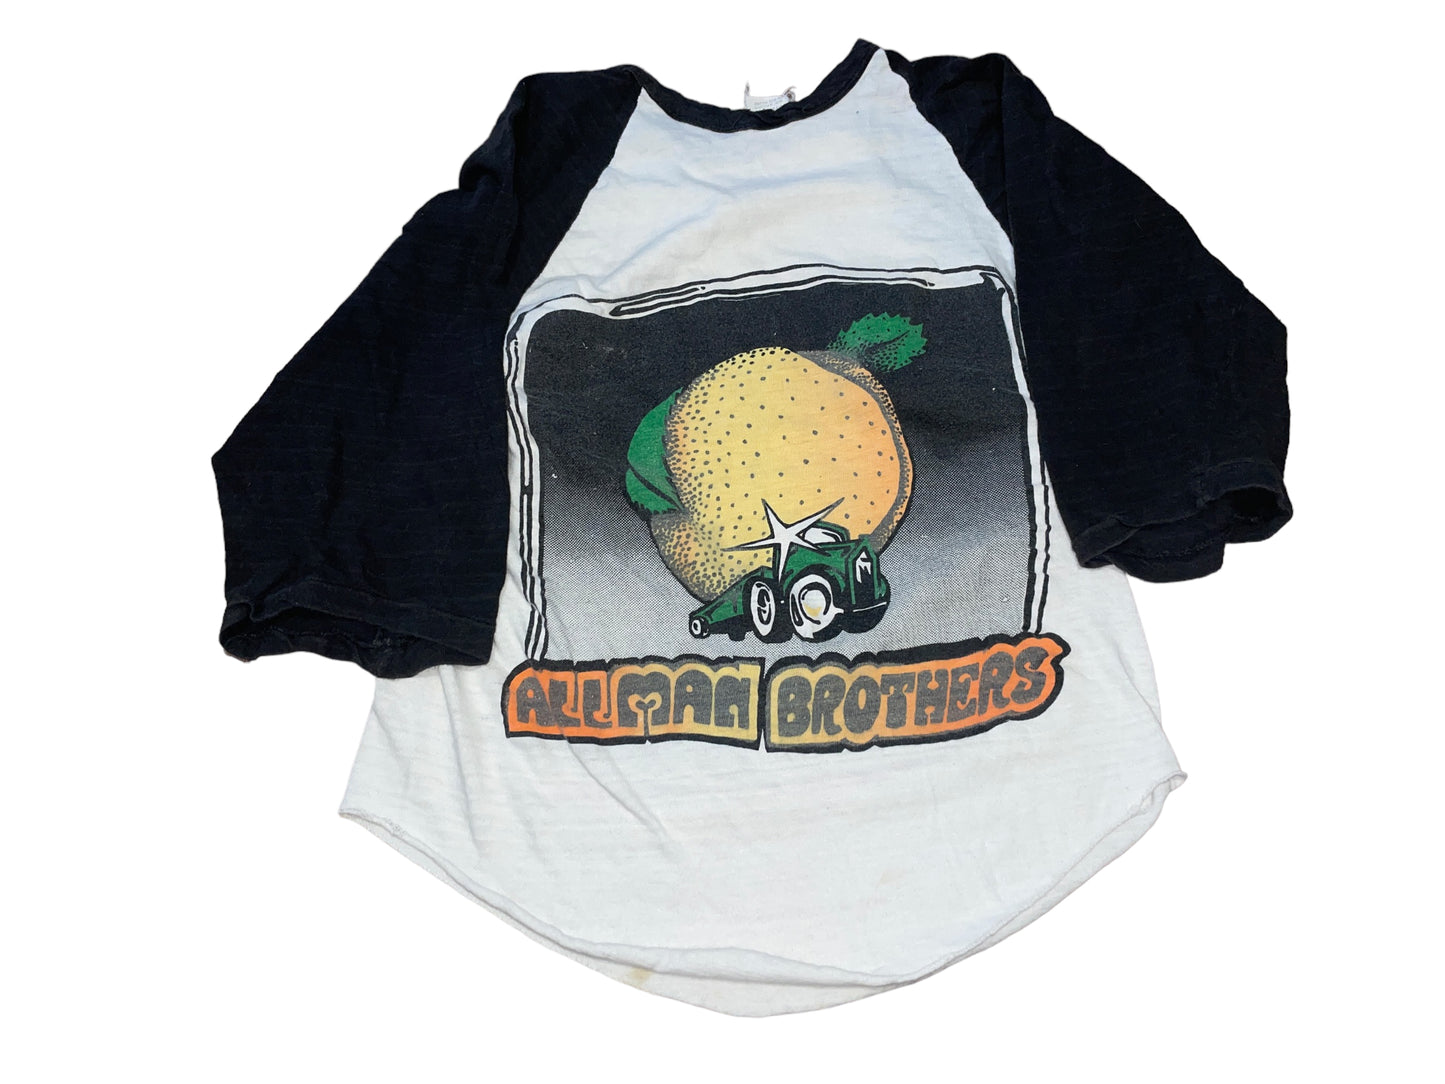 Vintage 70's The Allman Brothers Shirt